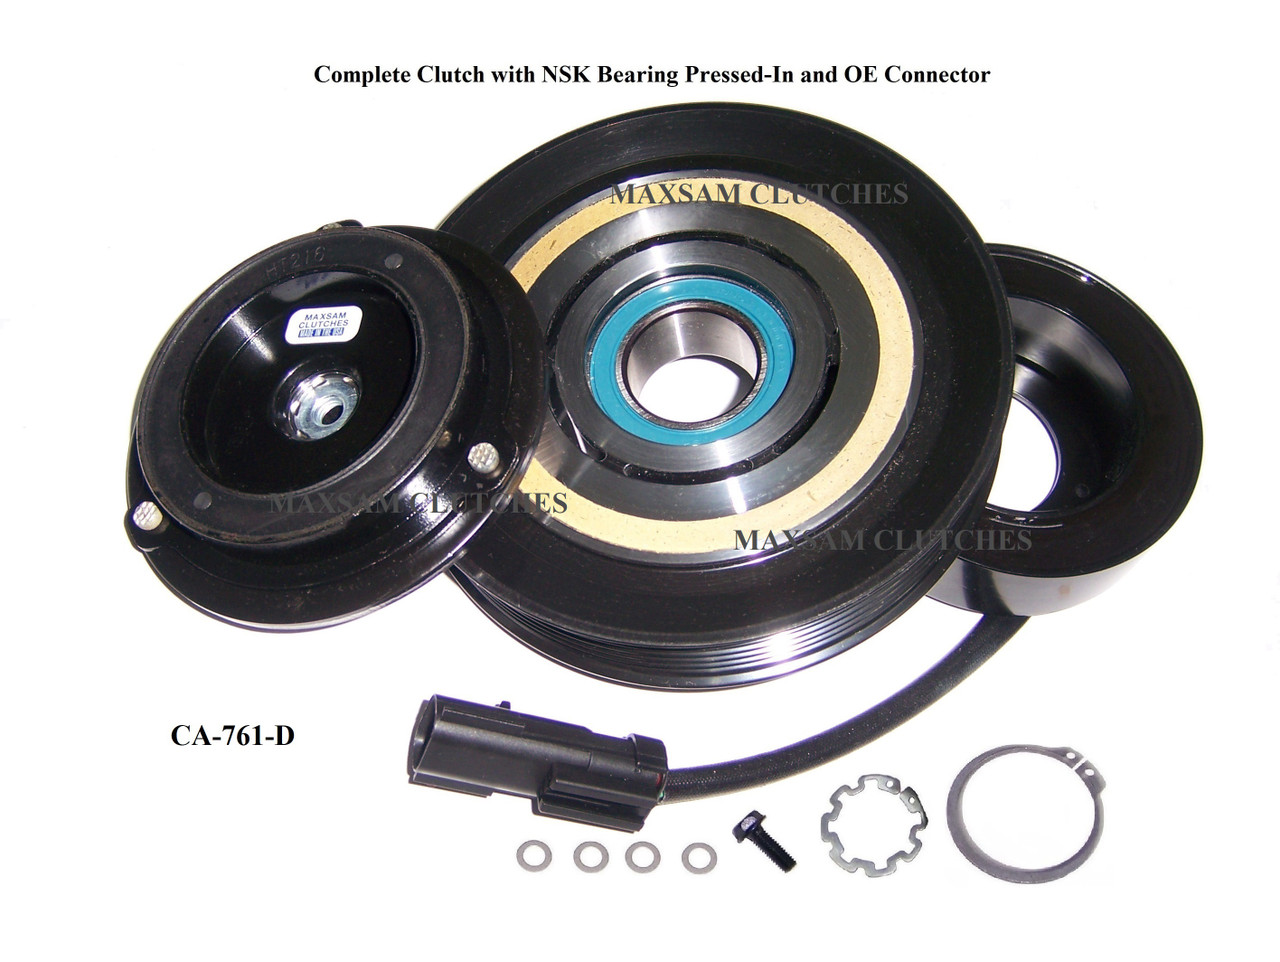 RAM 1500, 2011 - 2013, 3.7, 4.7 Liter, AC Compressor Complete CLUTCH (Read Details) Made by Maxsam Clutches in the USA